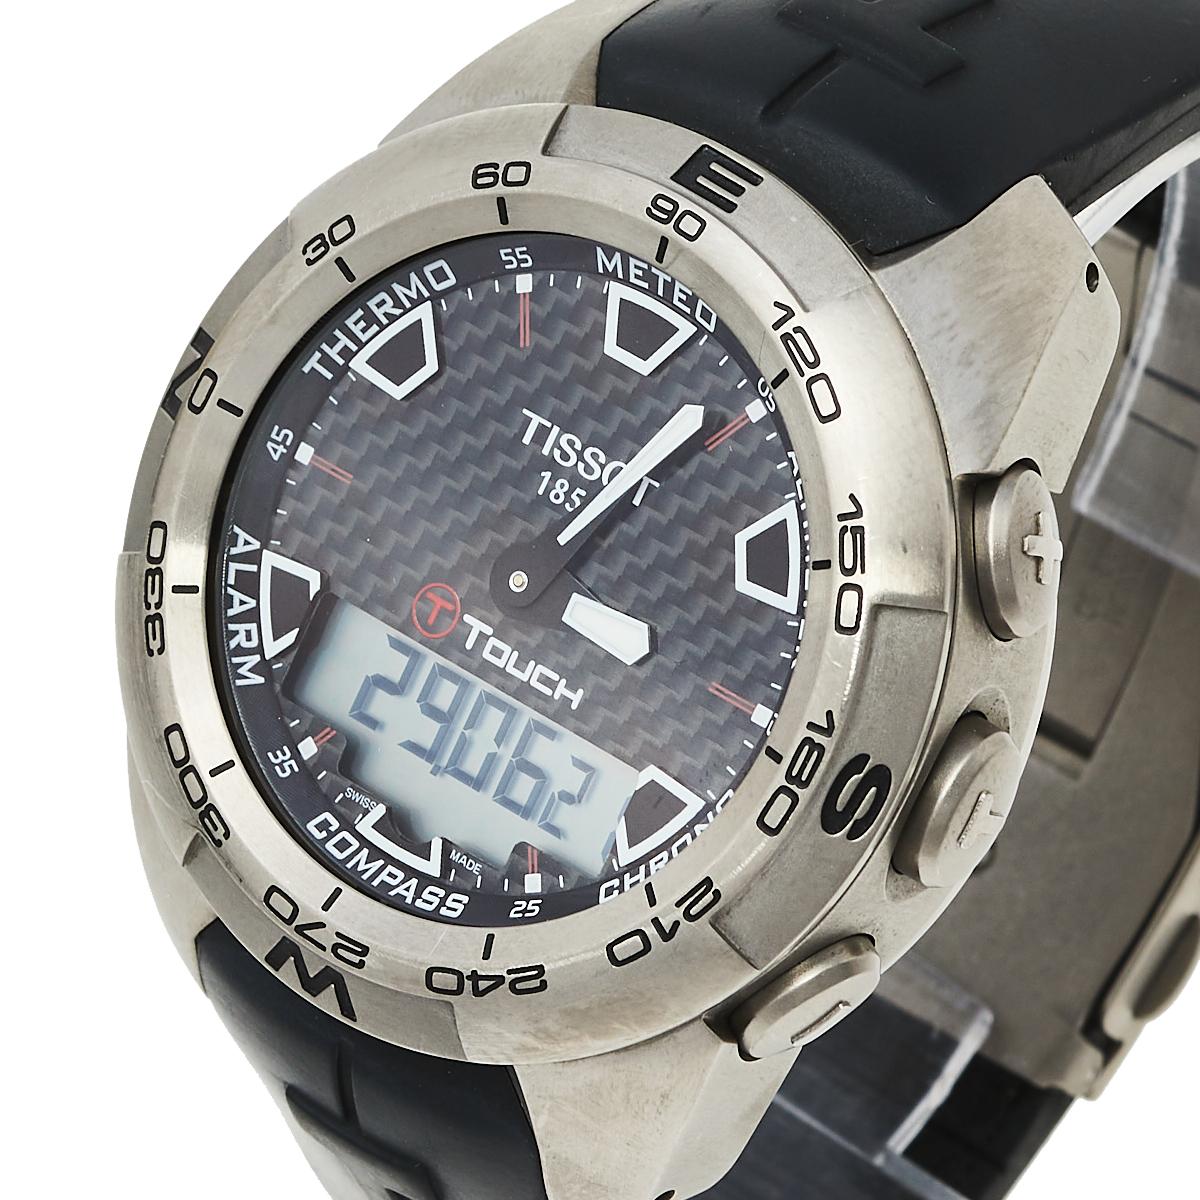 Featuring a men's sports-style watch from Tissot's T-Touch range. This titanium 43 mm watch comes with a rotating titanium bezel. The black analog-digital dial has luminous markers and hands. Functions include perpetual calendar, alarm, GMT,